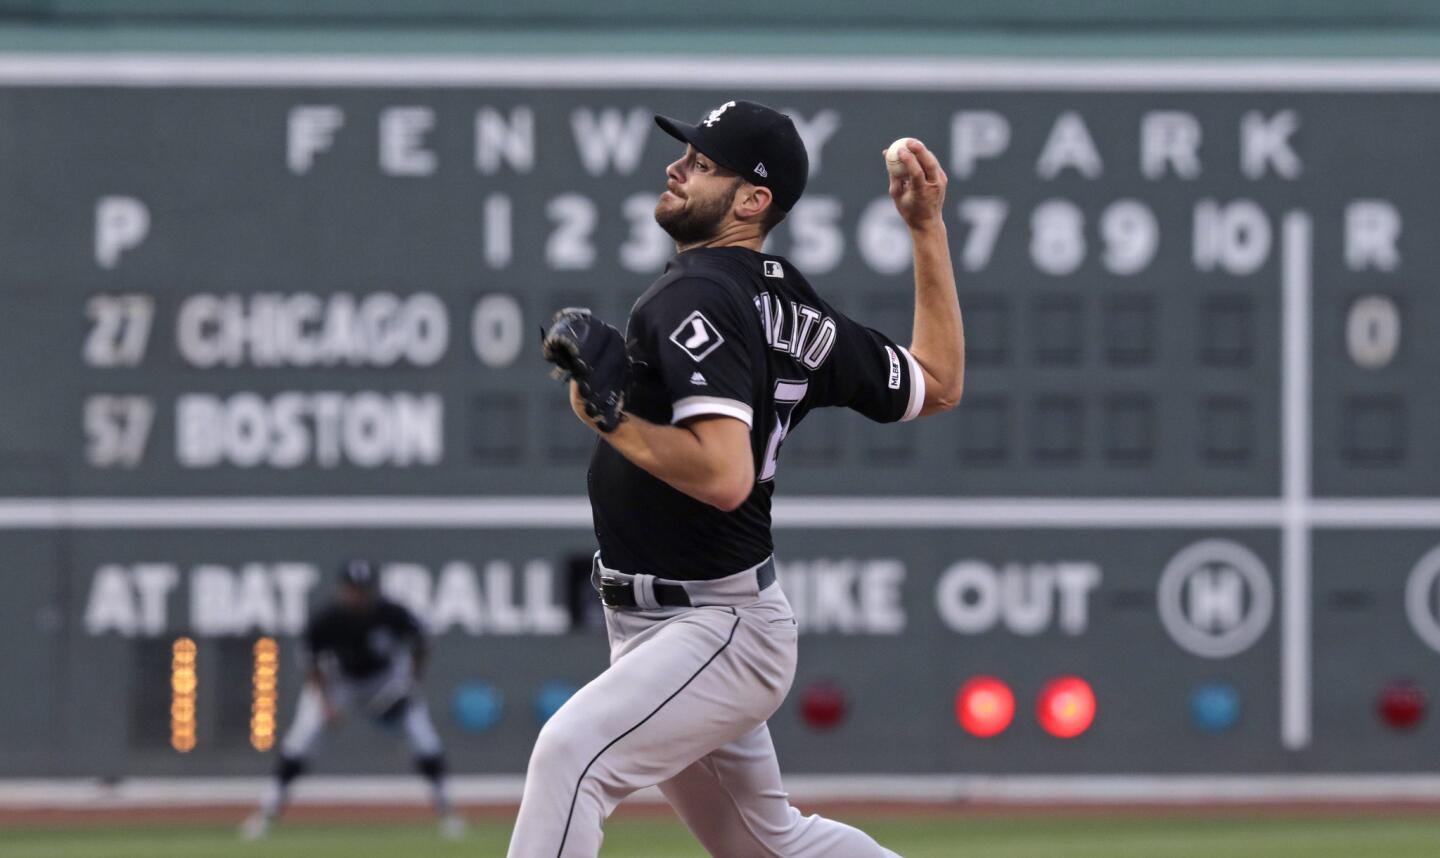 White Sox starting pitcher Lucas Giolito delivers during the first inning of game against the Red Sox at Fenway Park on June 24, 2019.